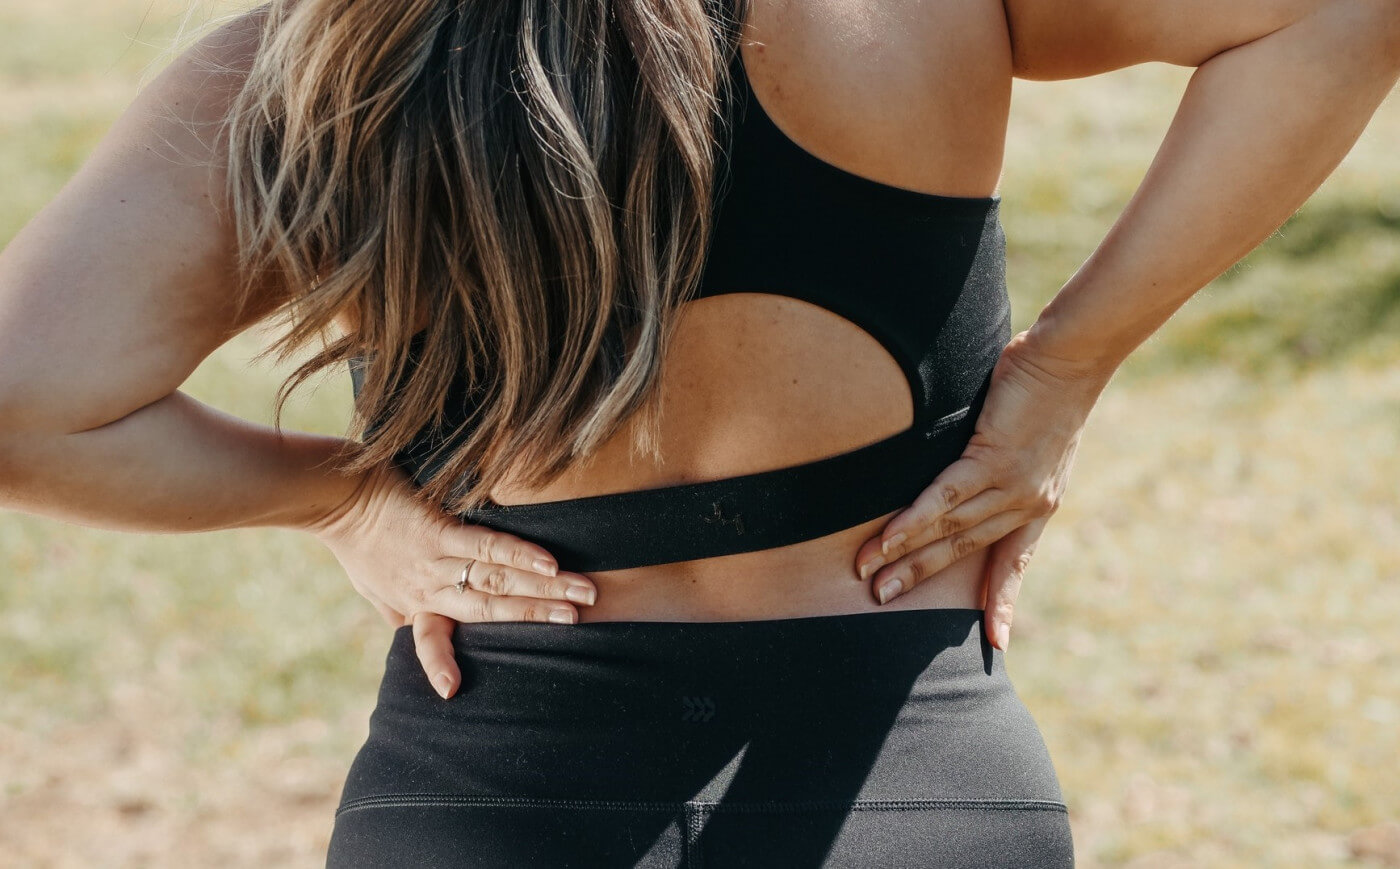 Does Massage Help Lower Back Pain? What You Need to Know